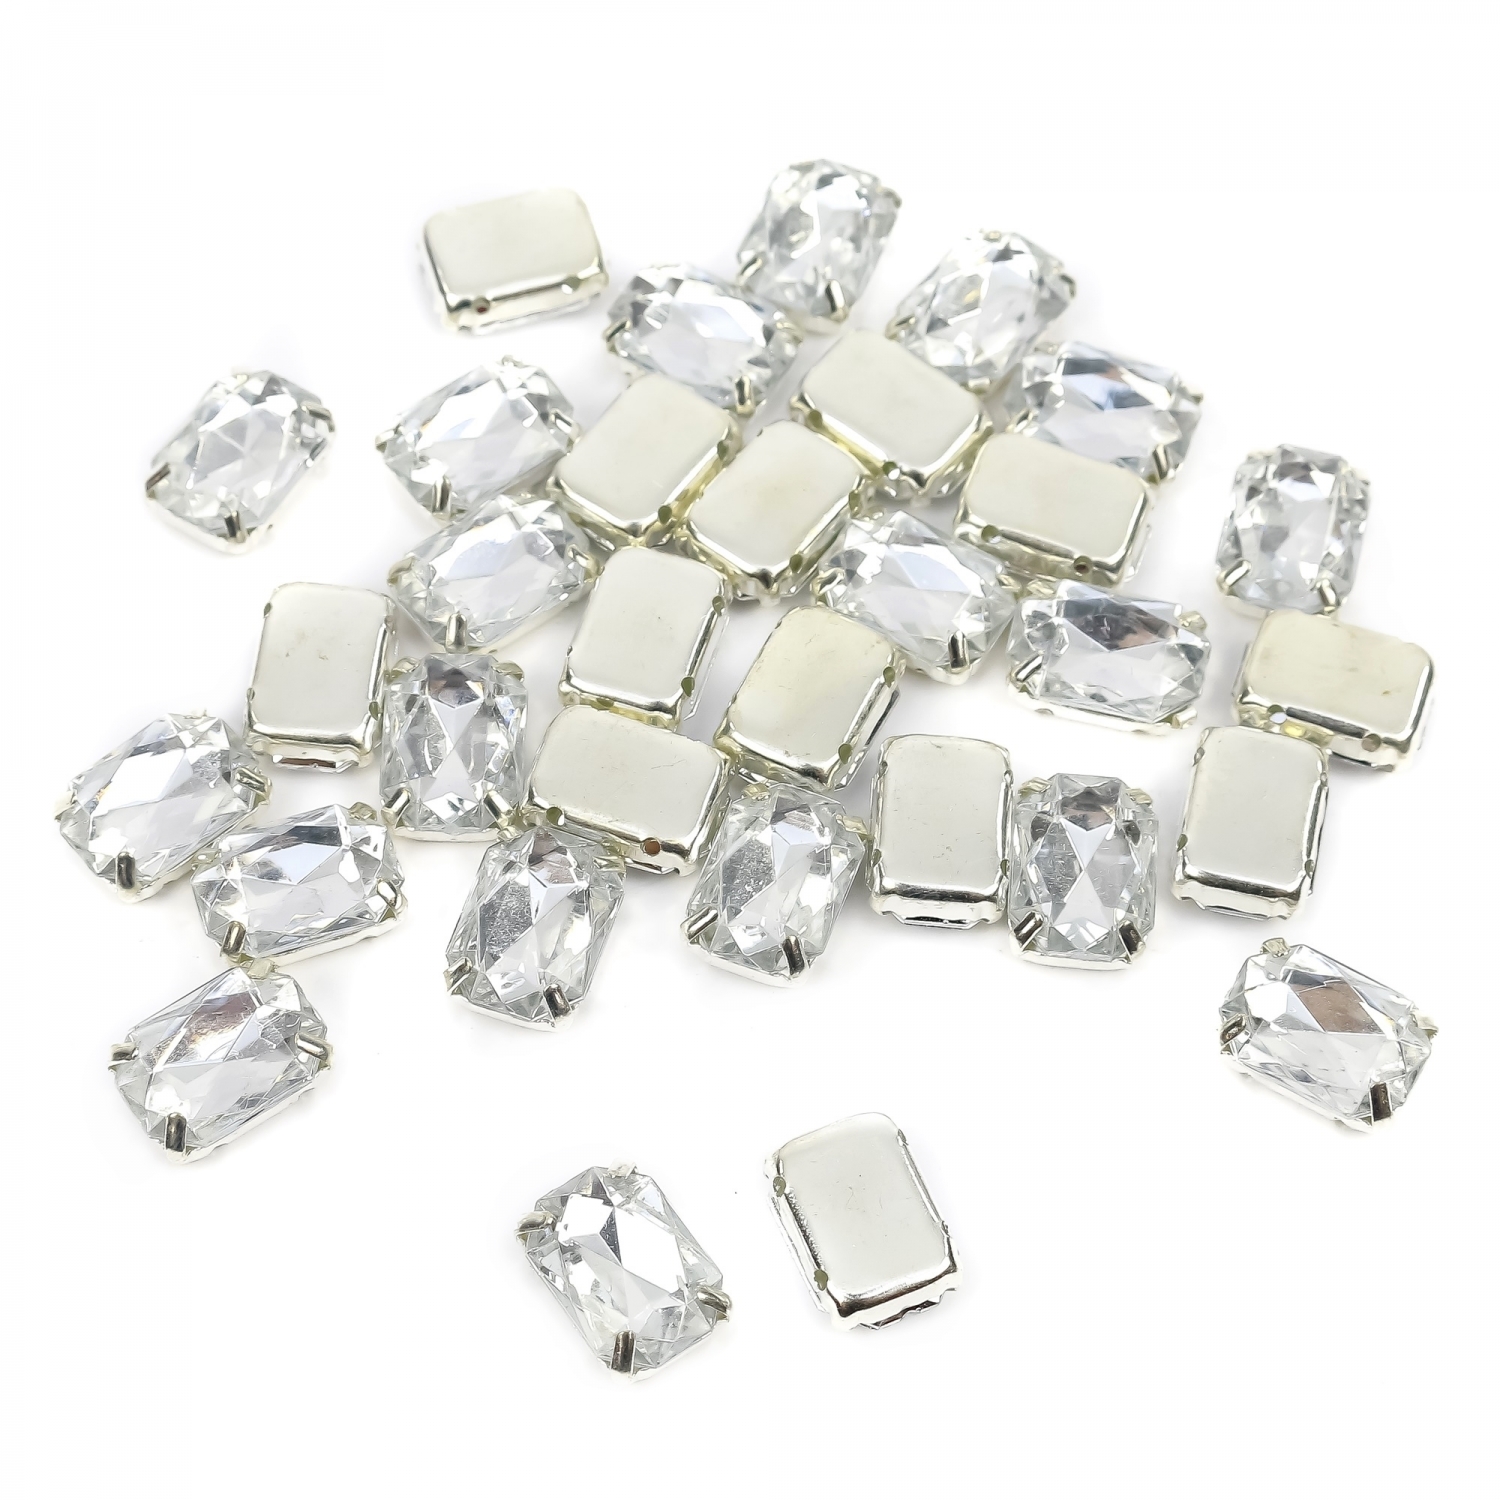 Sew-on Crystals, Size 10x14 mm (100 pcs/pack)Code: R11785